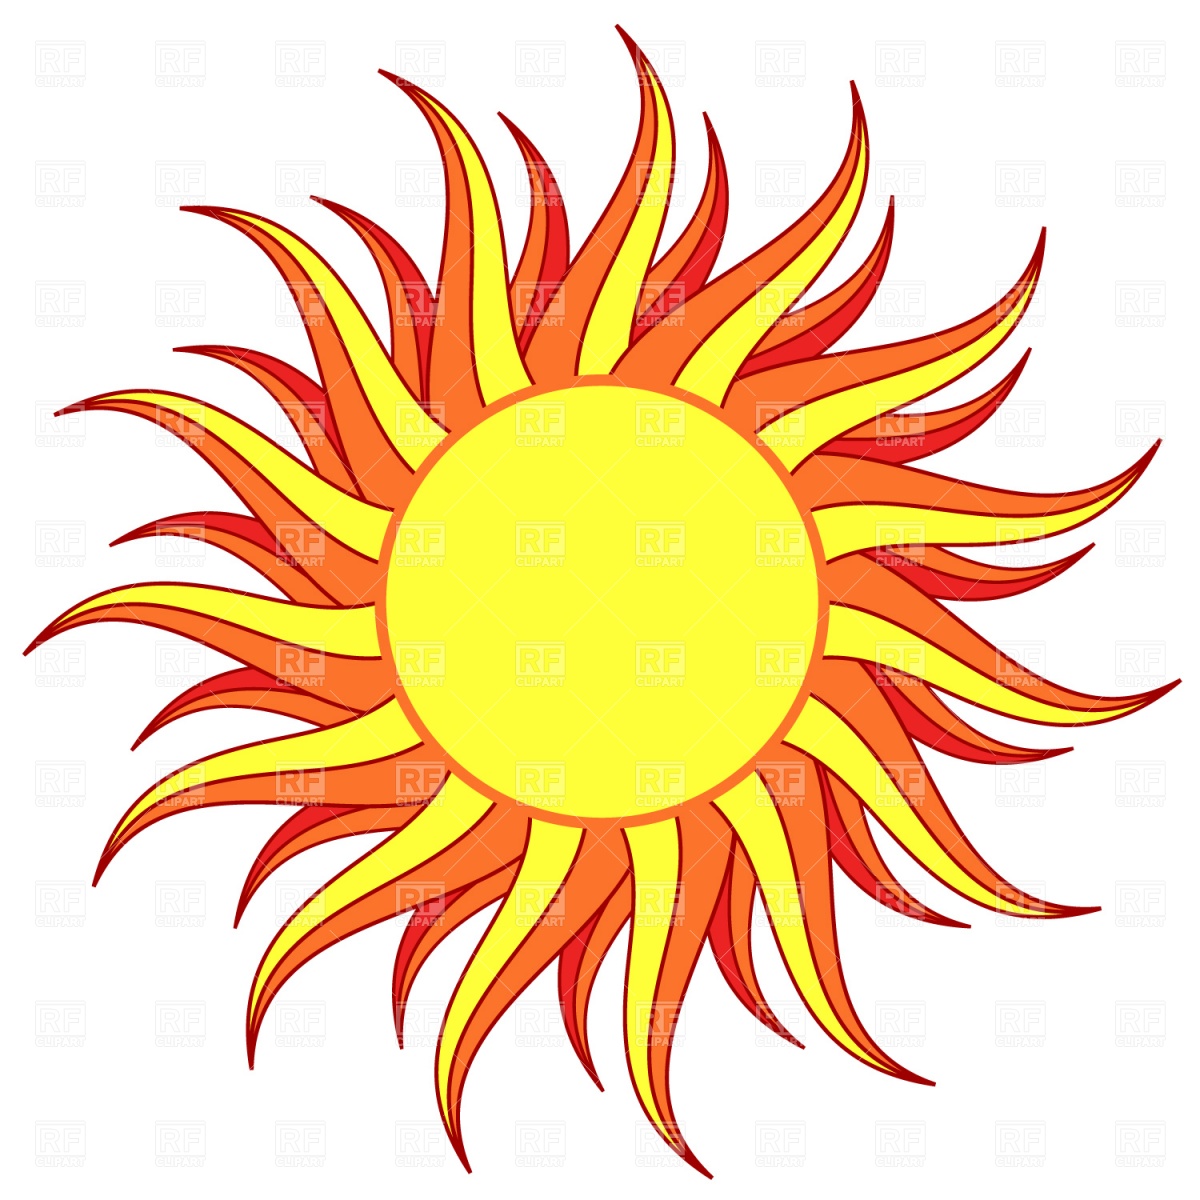 There Is 54 Sun Silhouette Free Cliparts All Used For Free